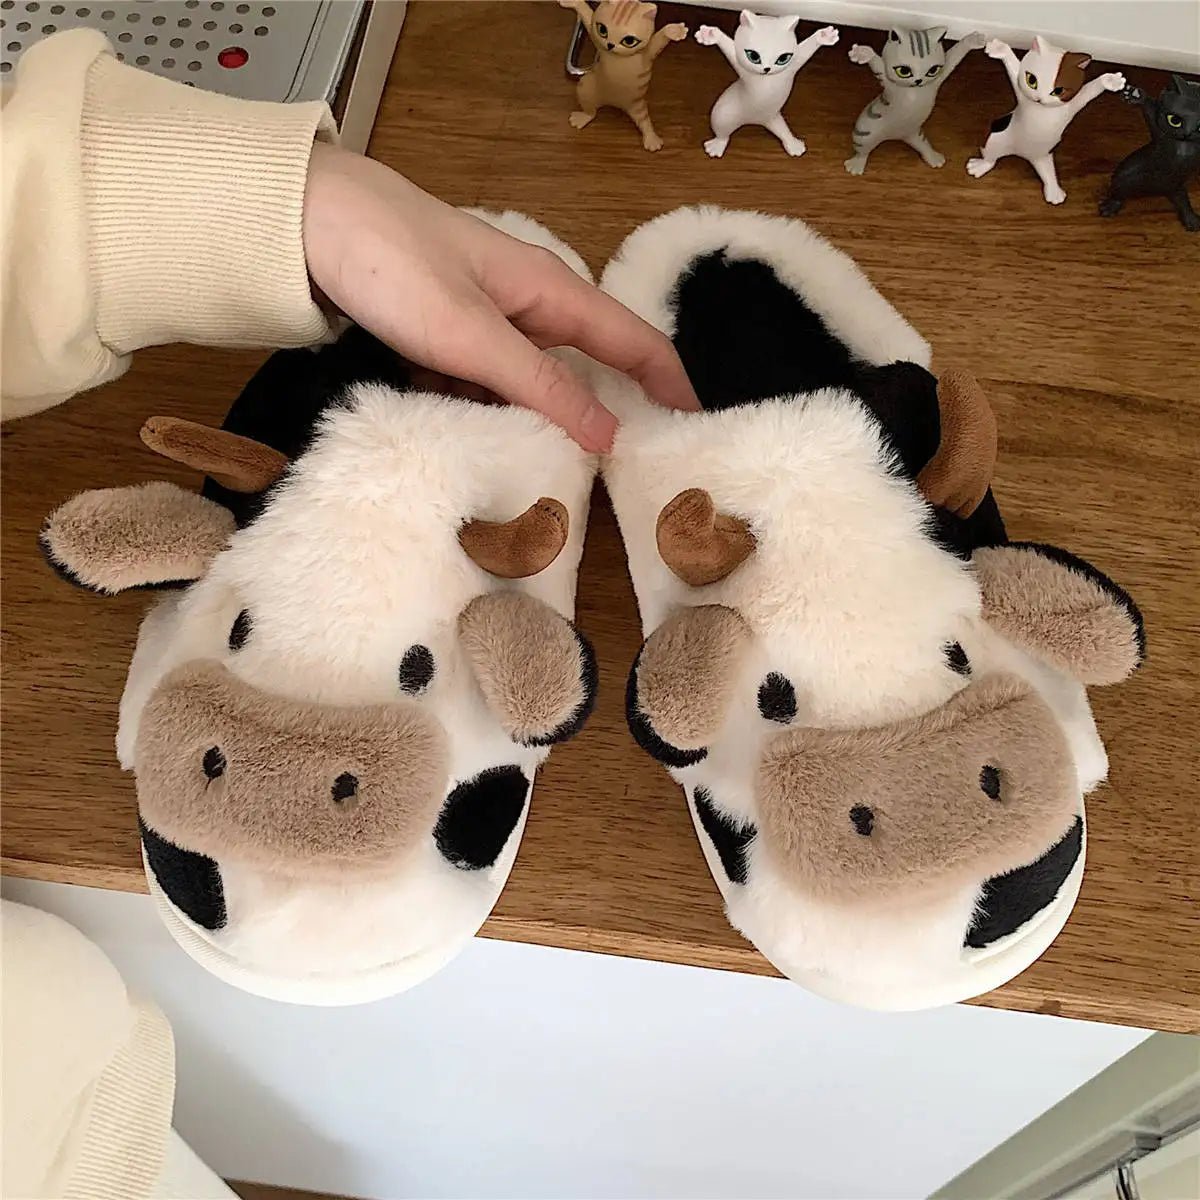 Women's Cartoon Cute Cow House Slippers Warm Plus Lined Closed Toe Fuzzy Home Slides Women's Fluffy Comfy Shoes Winter Autumn